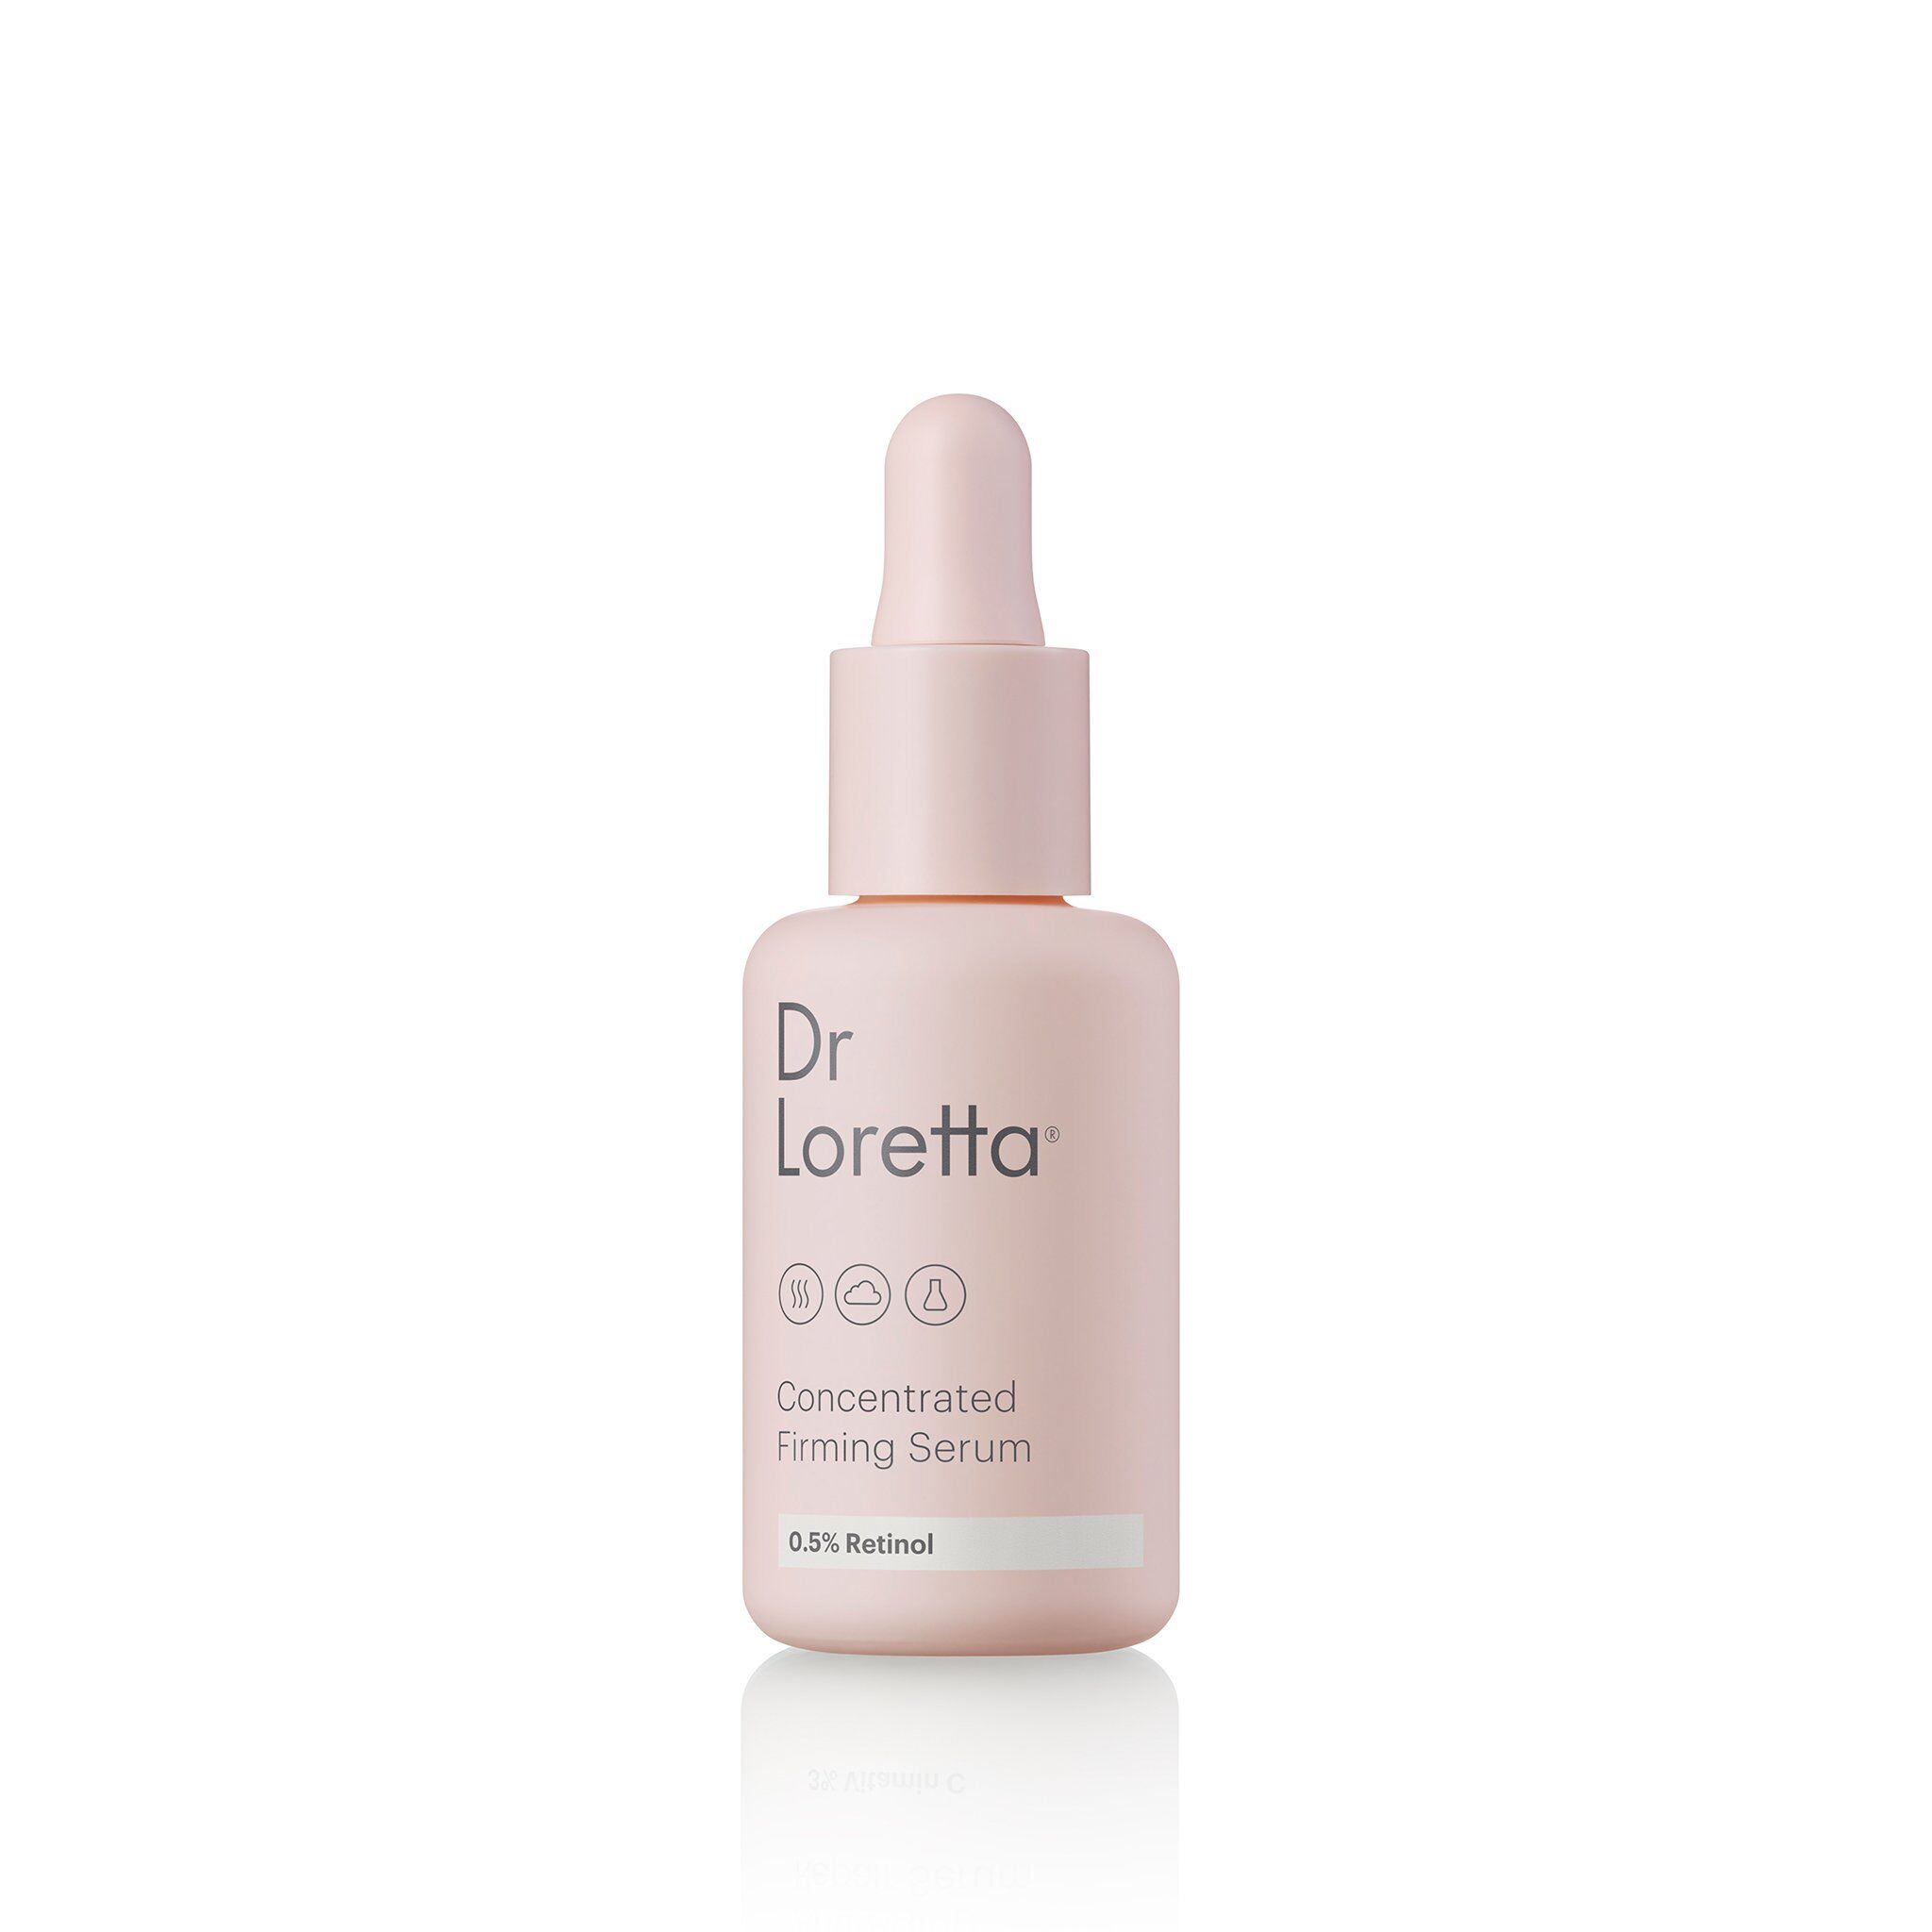 Dr. Loretta - Concentrated Firming Serum